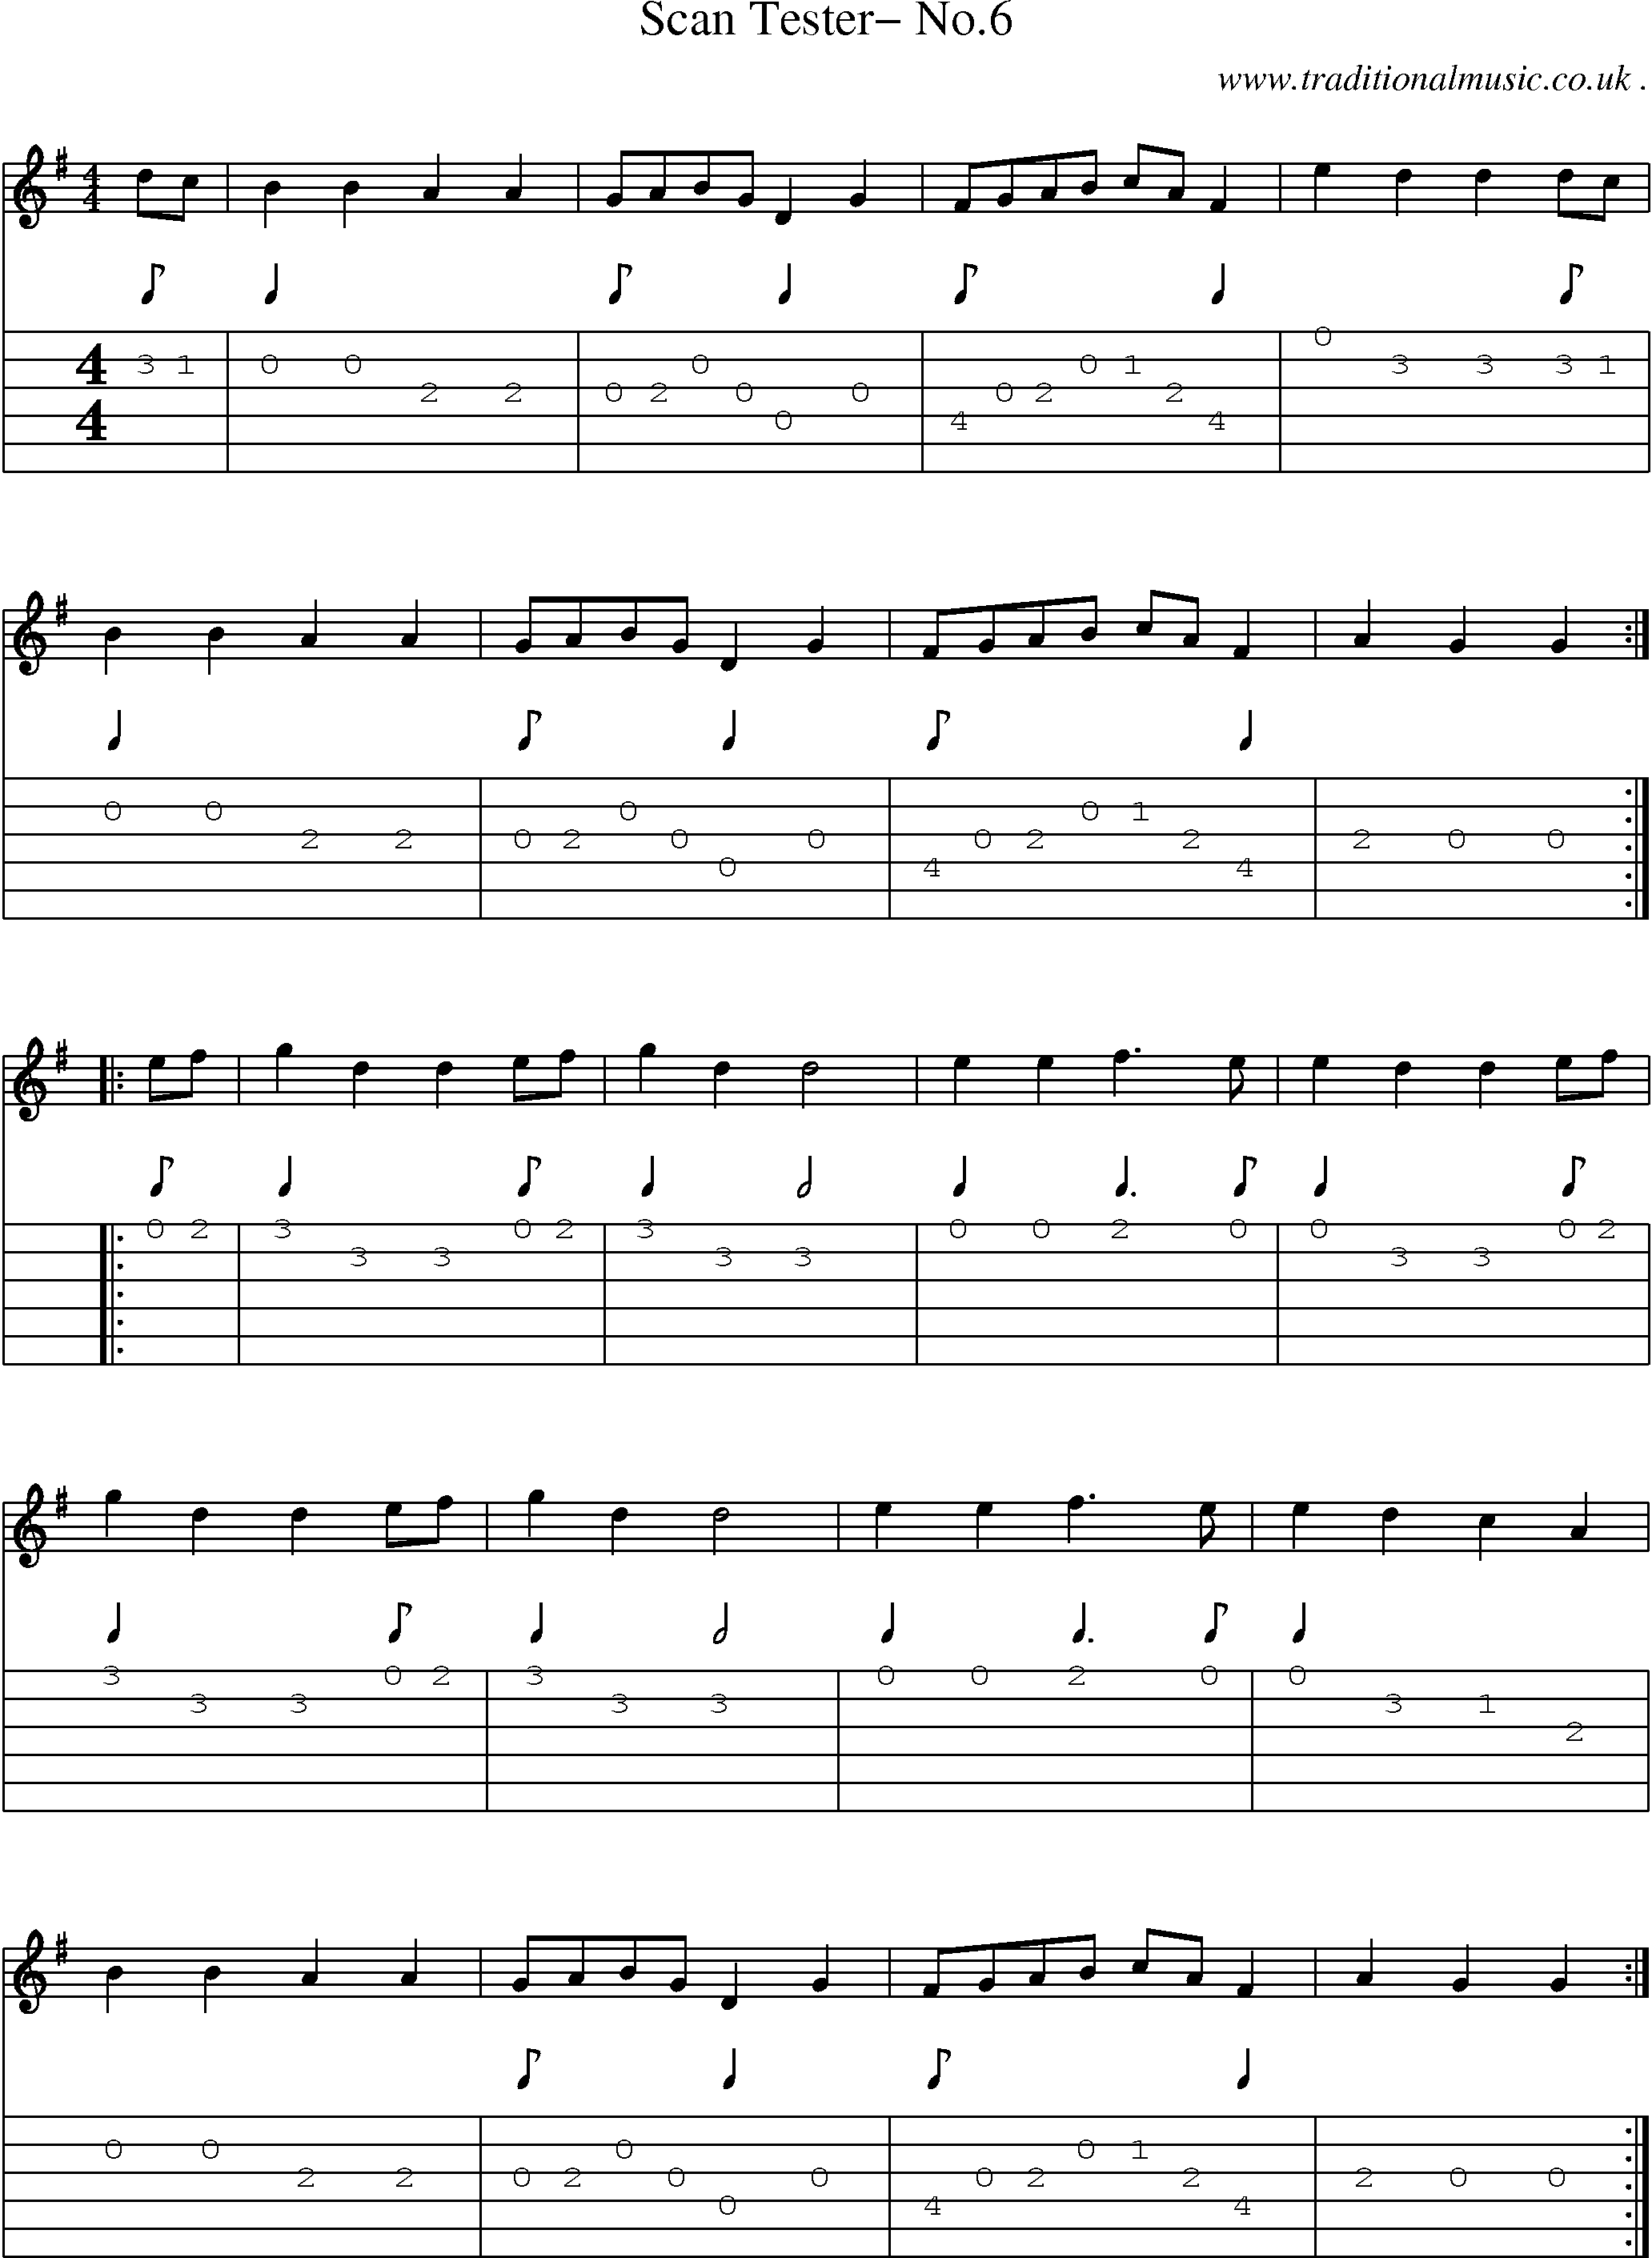 Sheet-Music and Guitar Tabs for Scan Tester No6